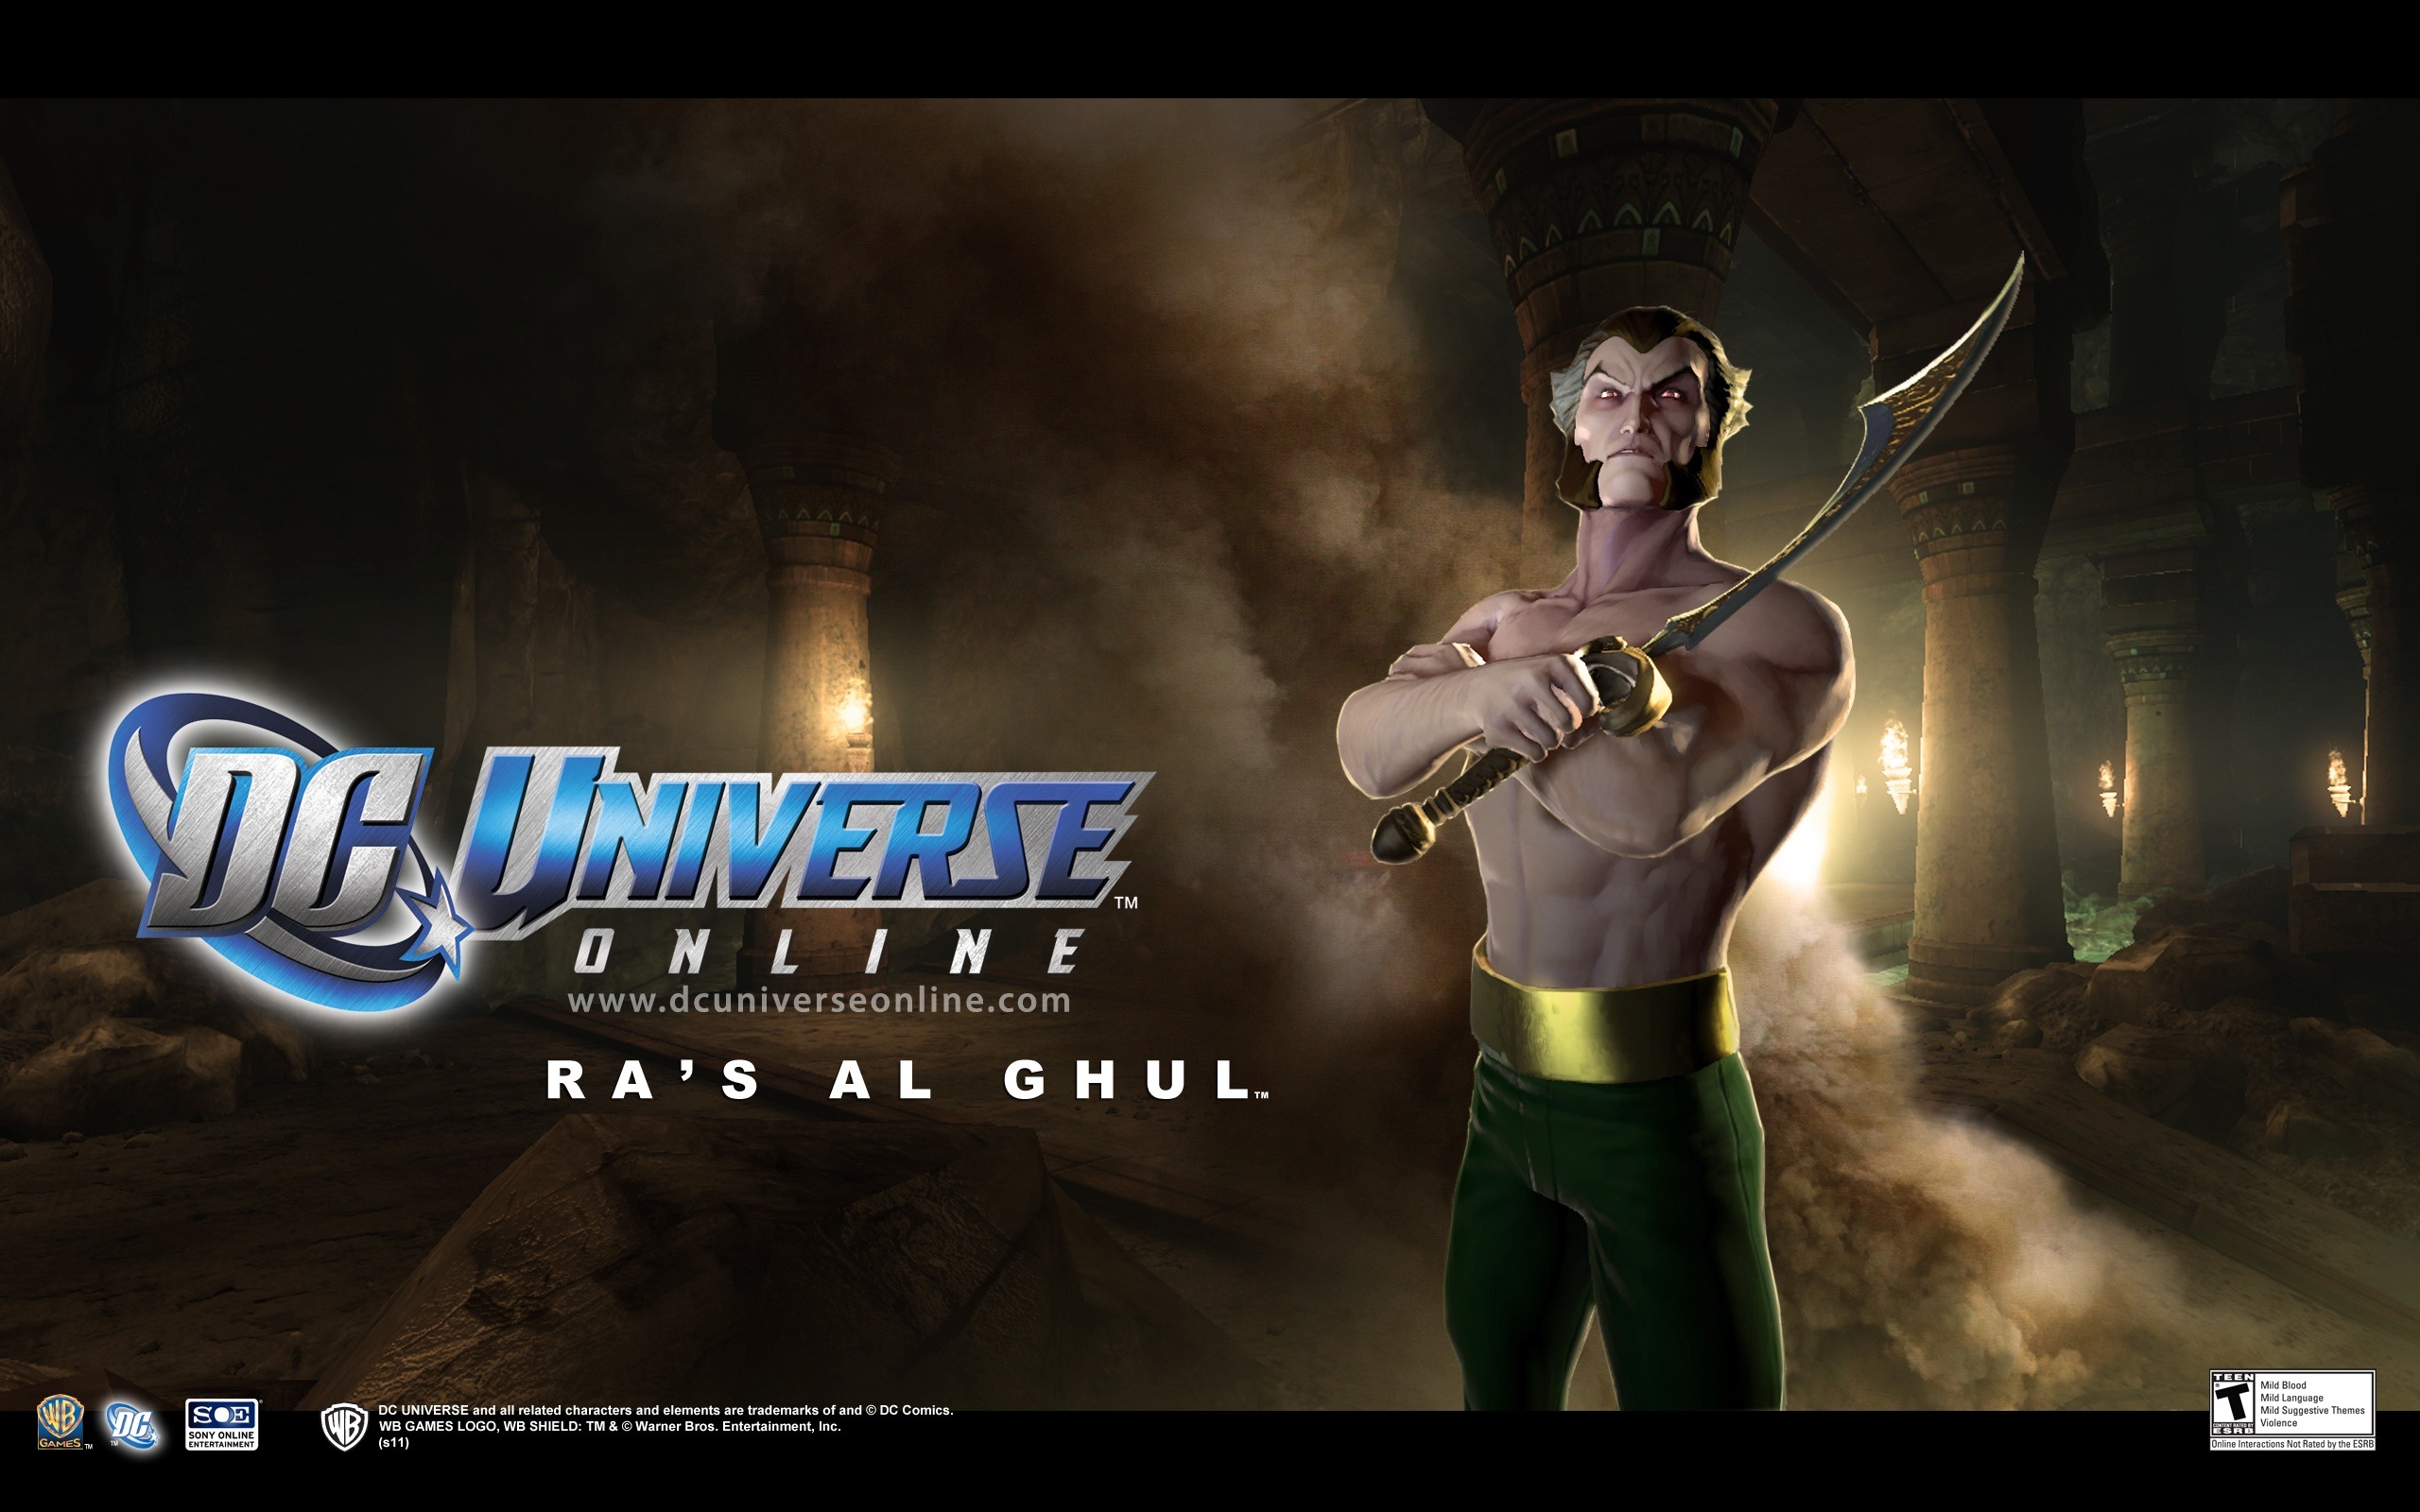 DC Universe Online HD game wallpapers #8 - 2560x1600